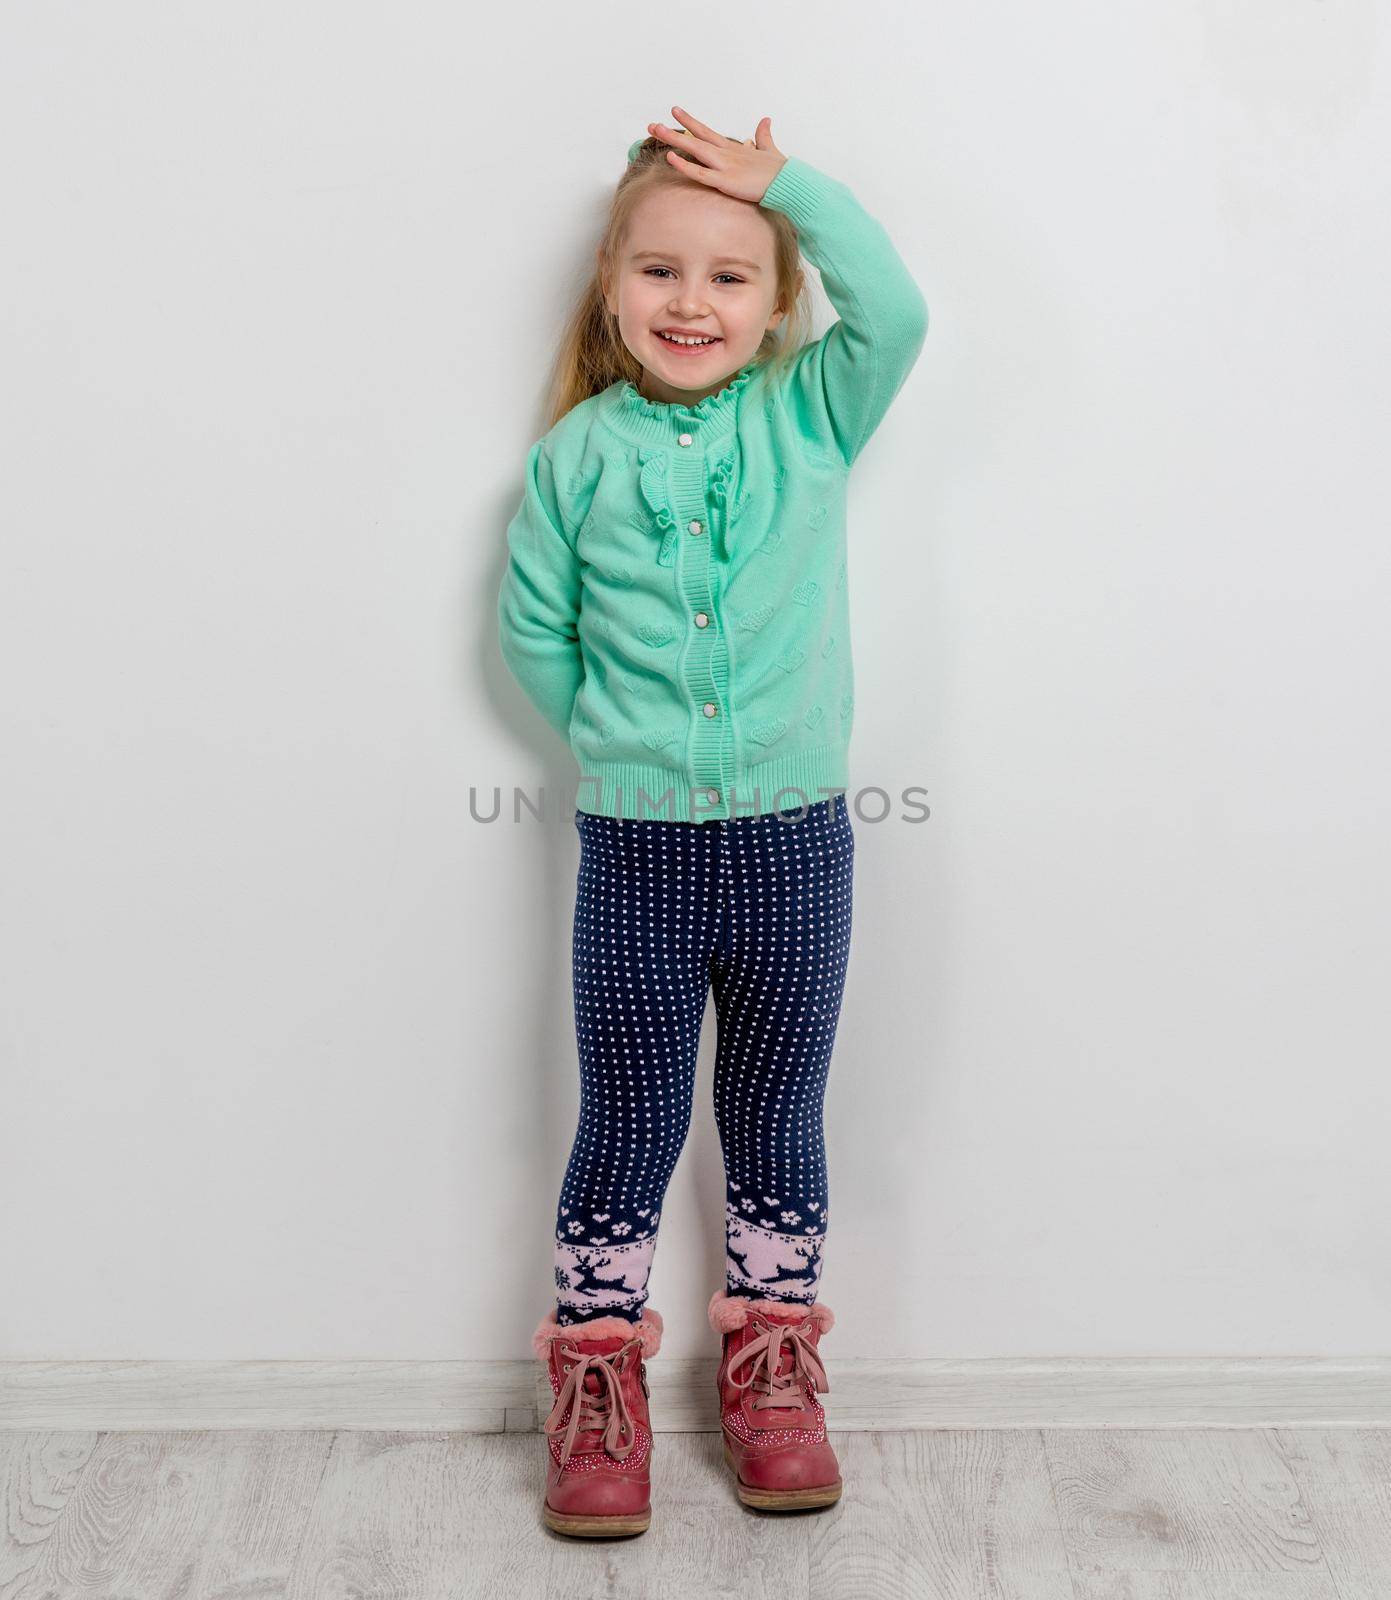 beautiful cheerful little girl with her hands in pockets of jeans